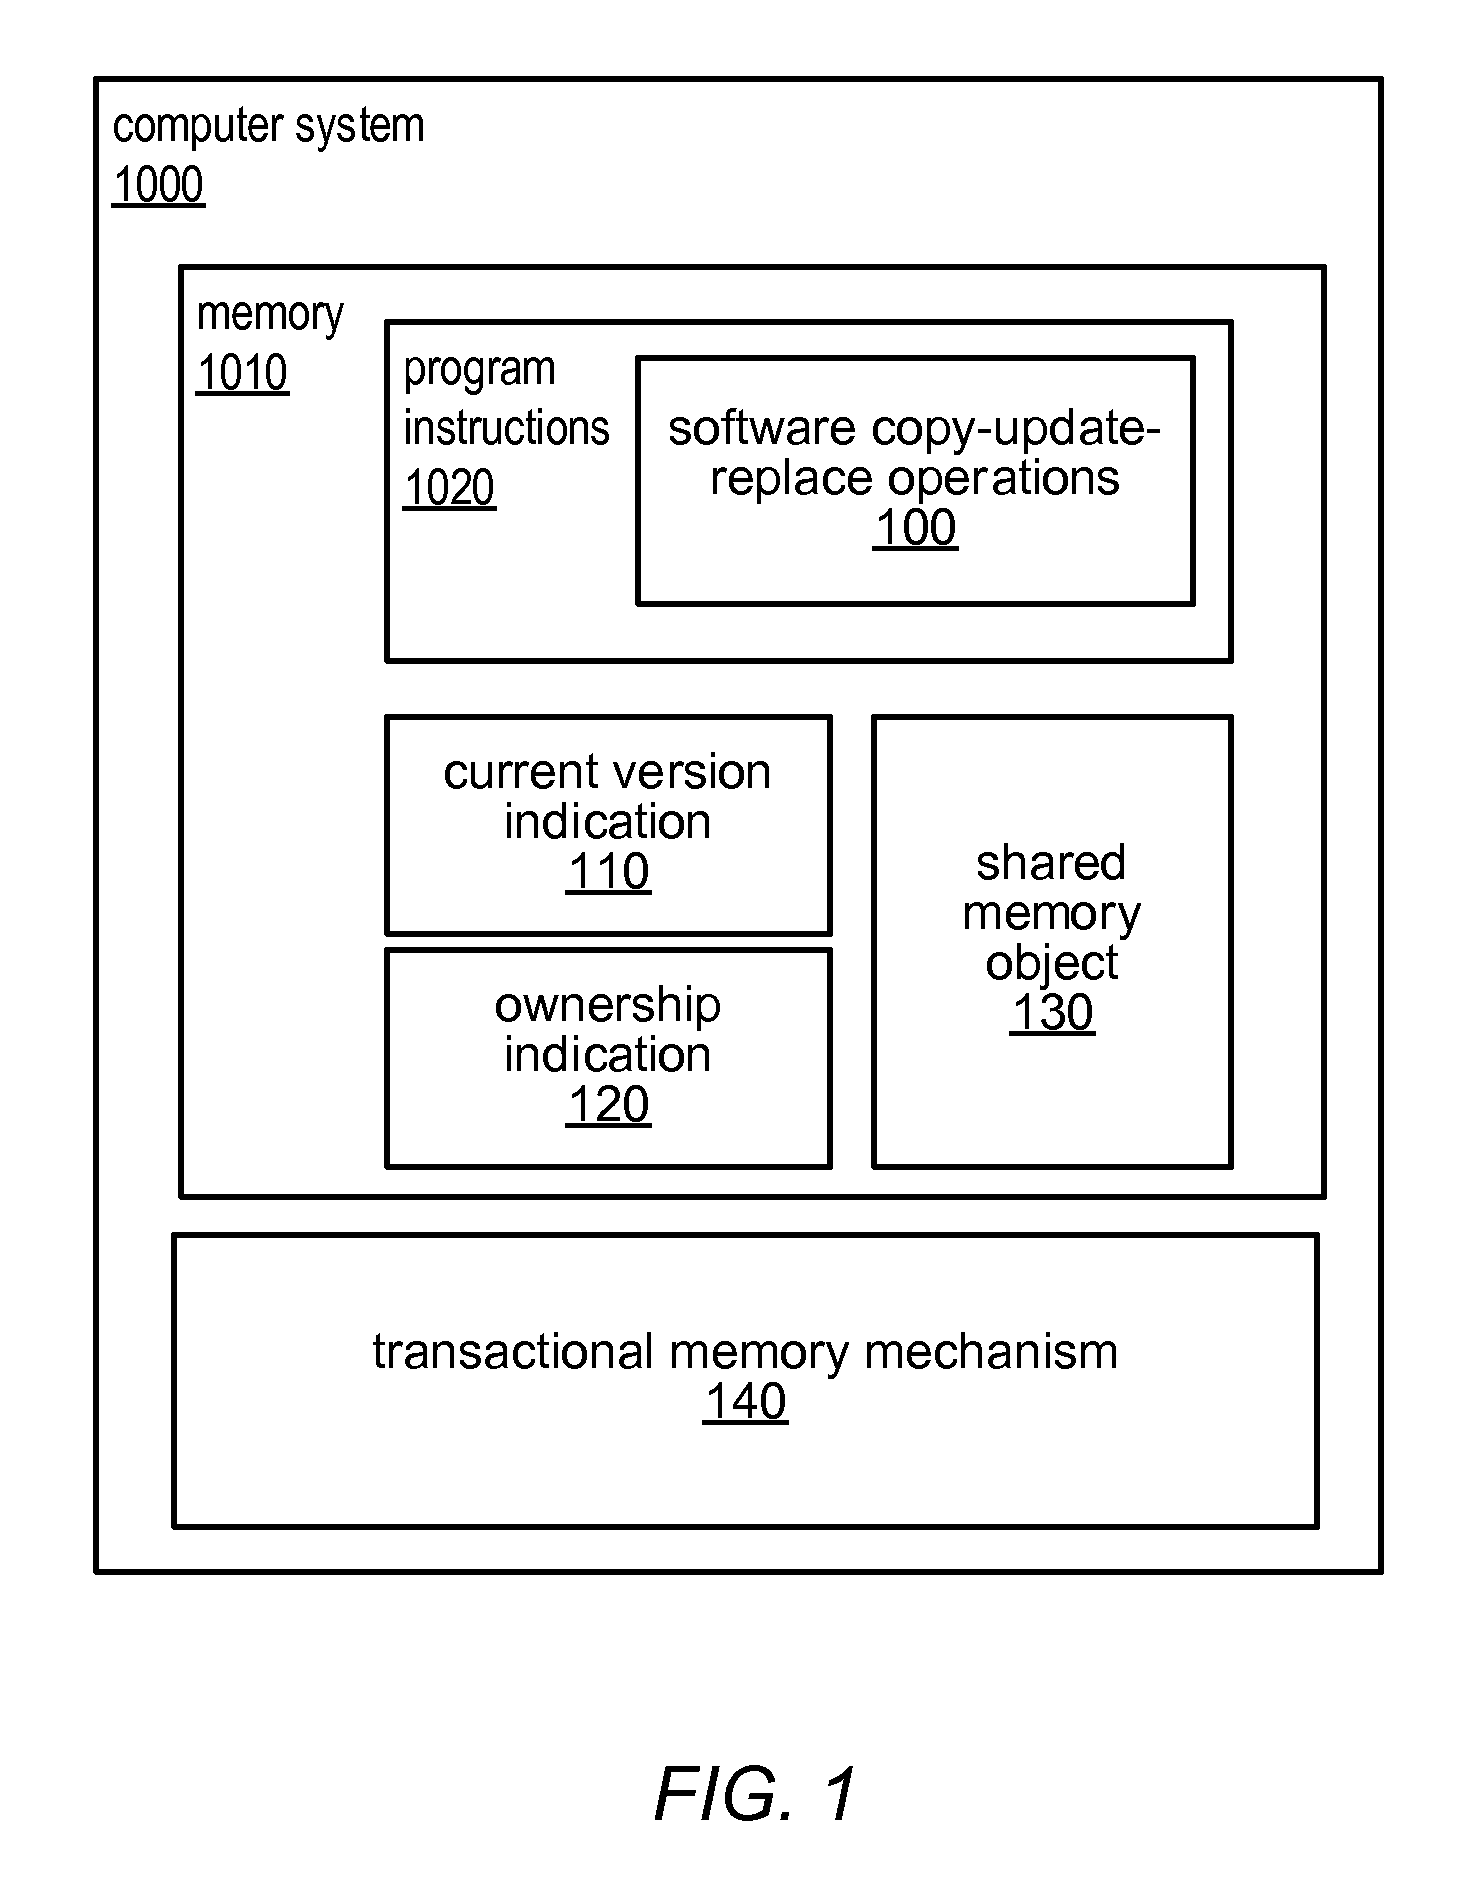 Coordinating accesses to shared objects using transactional memory mechanisms and non-transactional software mechanisms